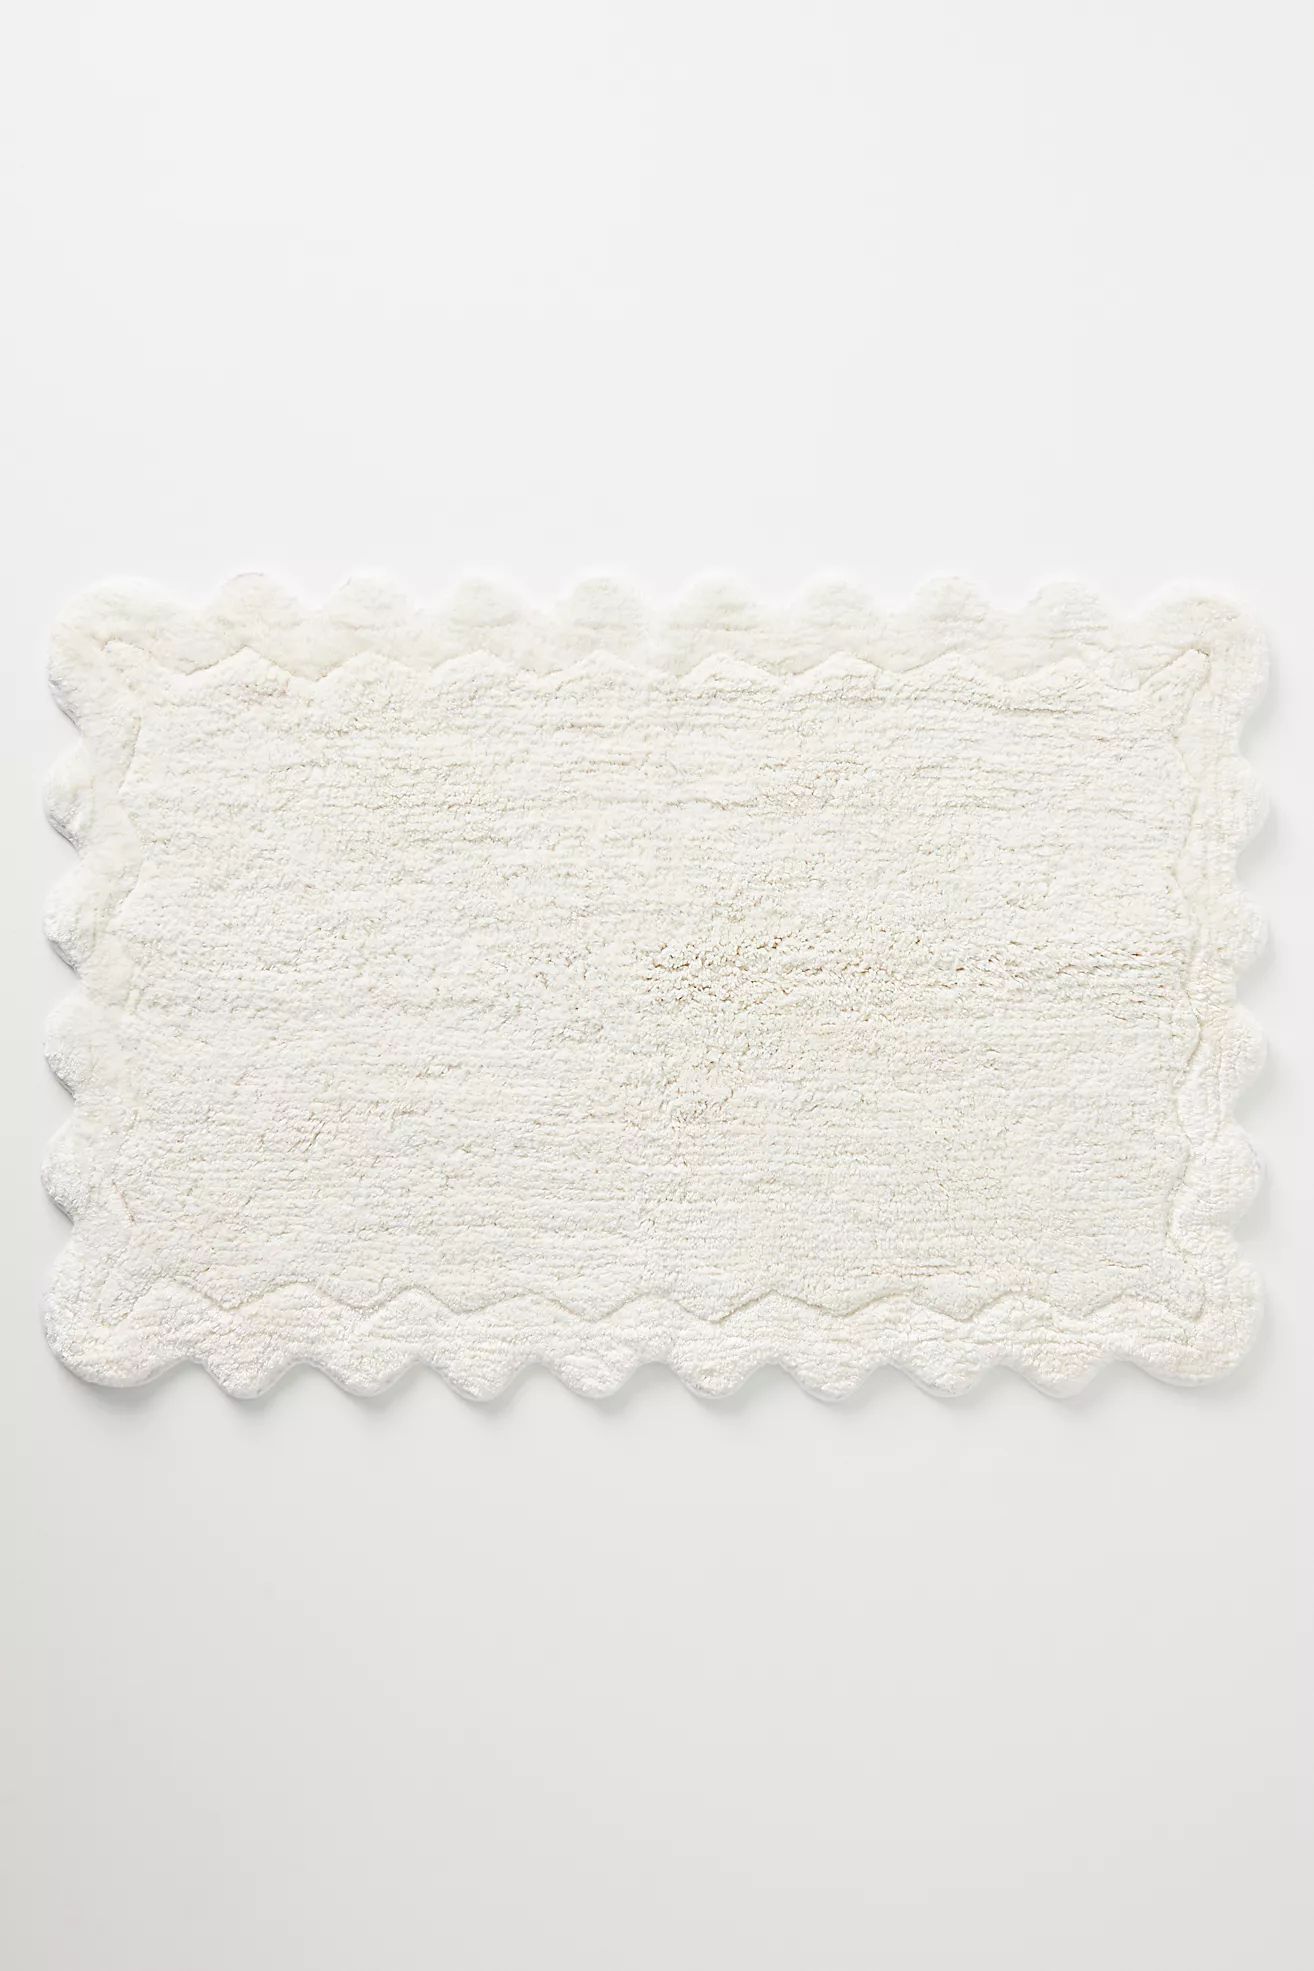 Maeve by Anthropologie Scalloped Bath Mat | Anthropologie (US)